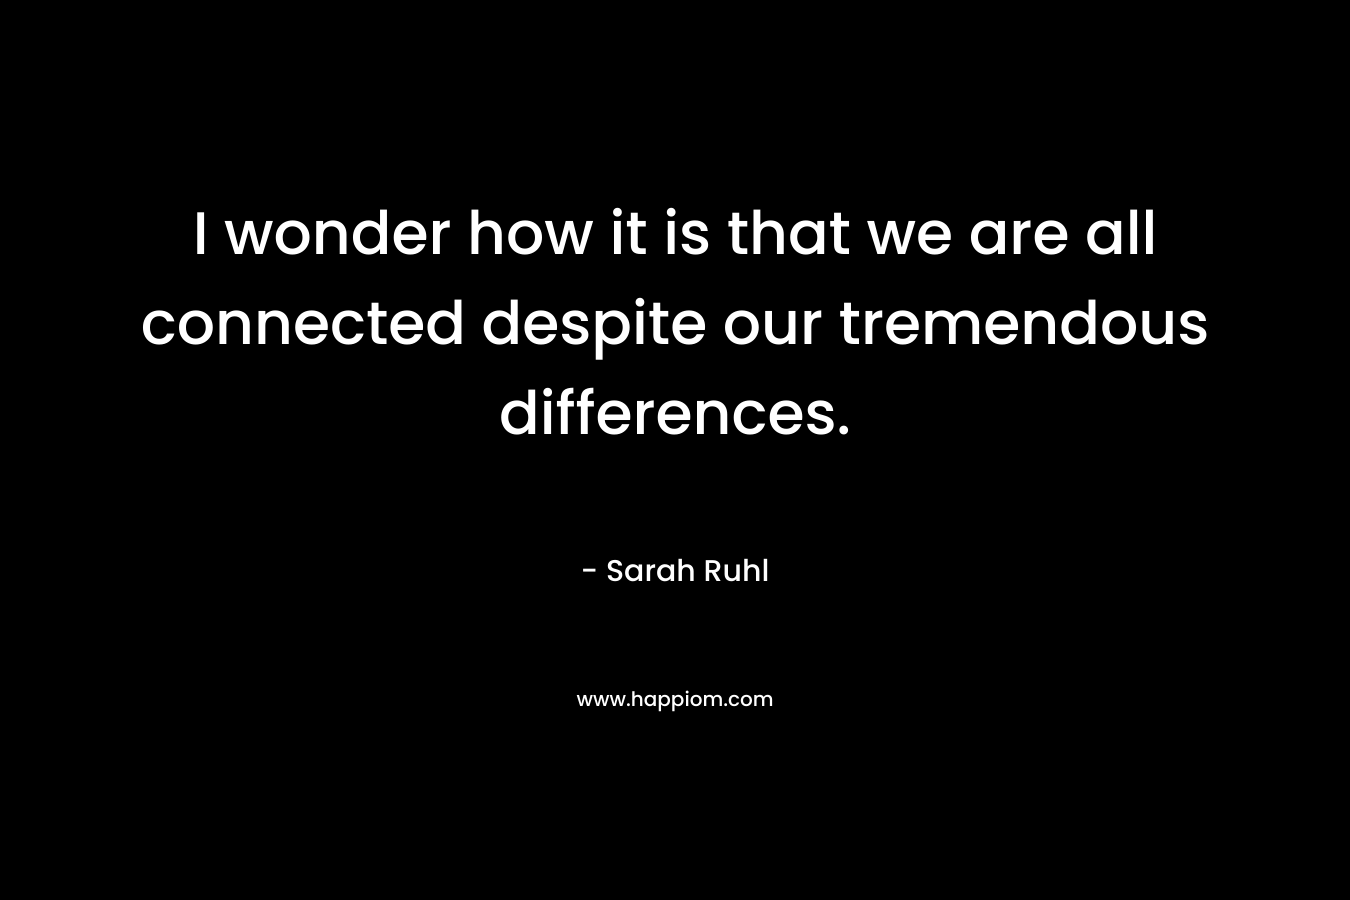 I wonder how it is that we are all connected despite our tremendous differences. – Sarah Ruhl